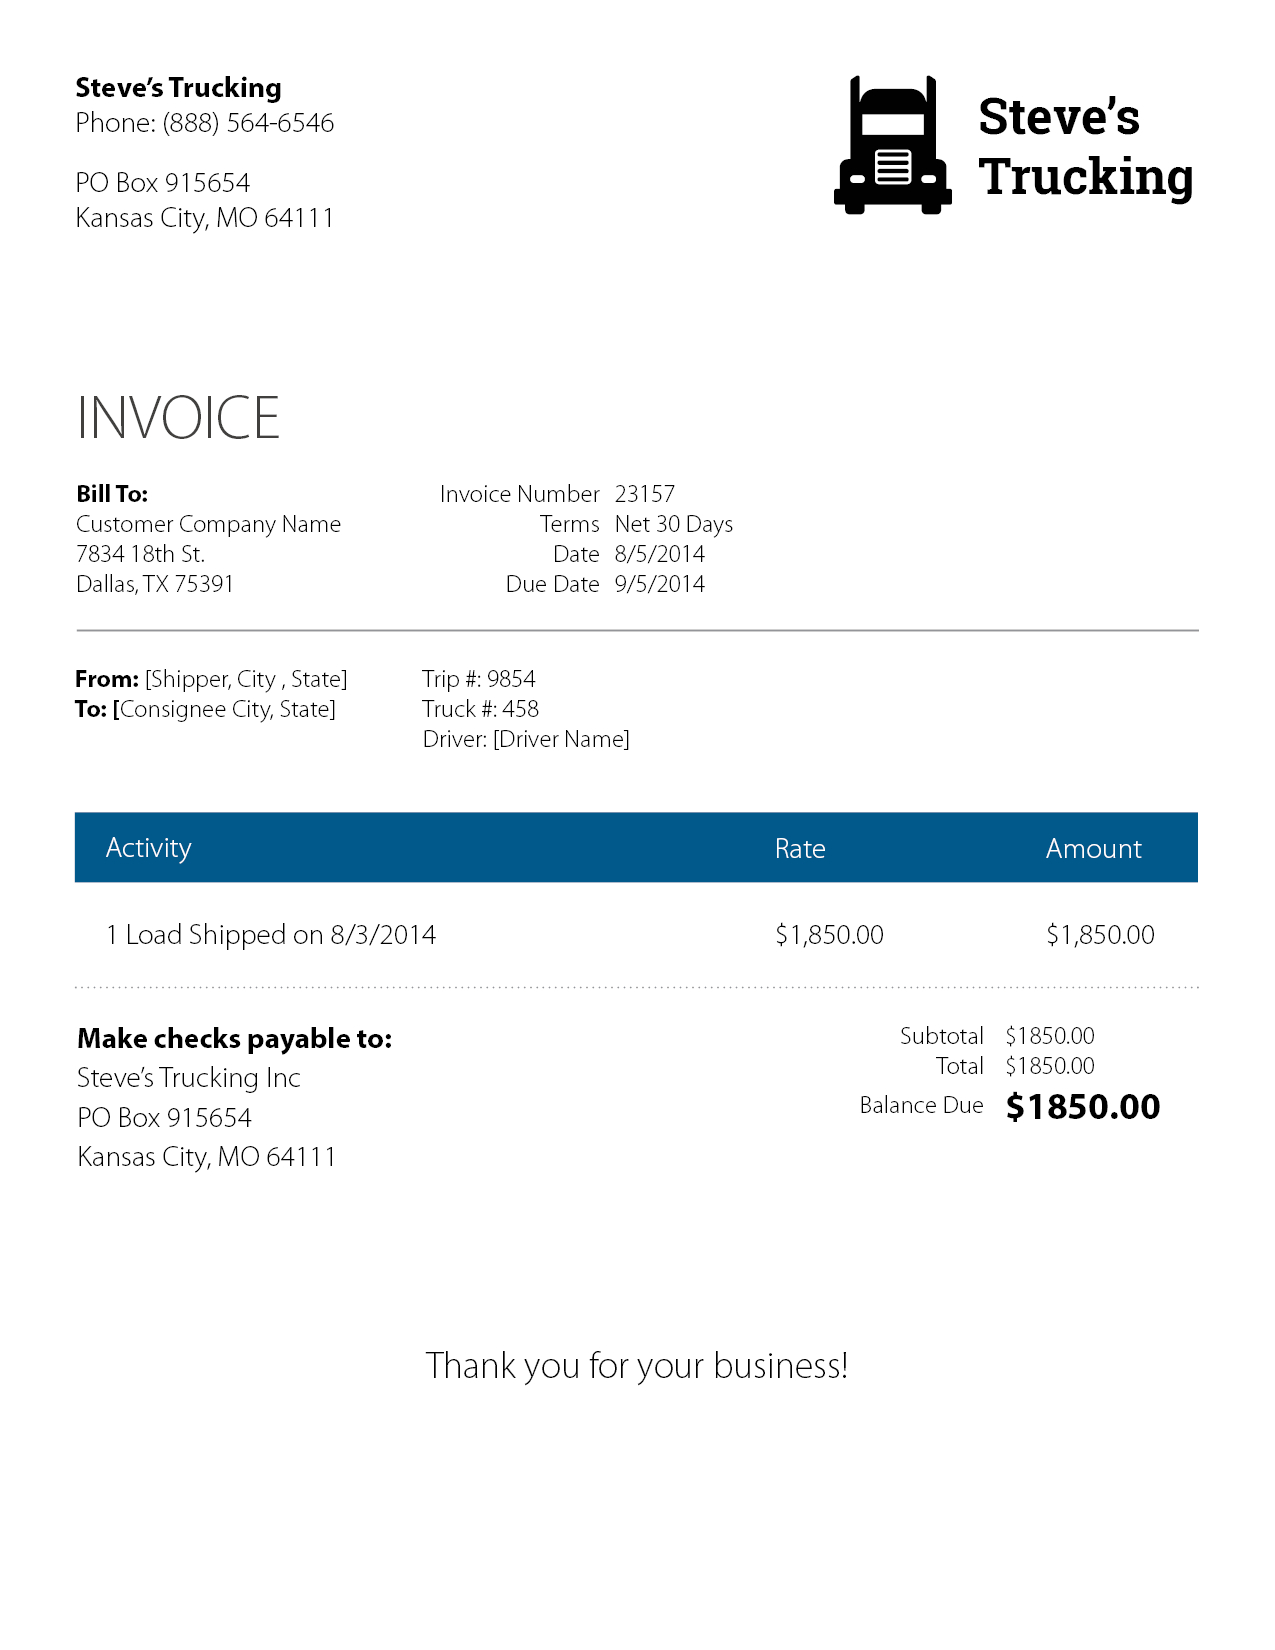 Eight Keys To A Rock-Solid Trucking Invoice | Rts Financial with regard to Trucking Company Invoice Template